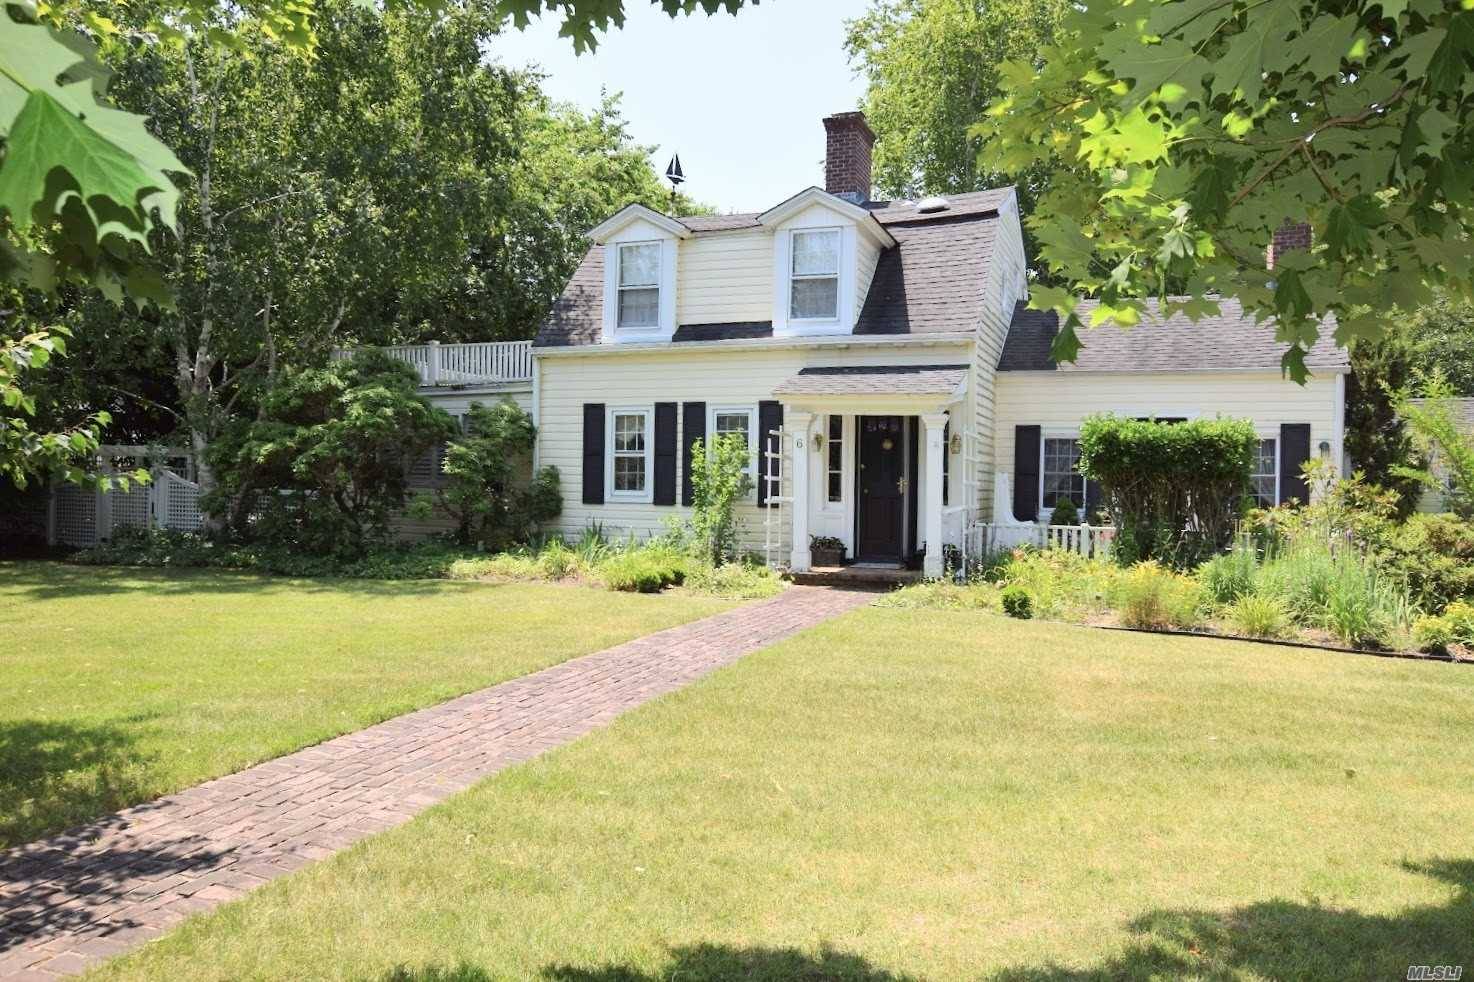 Darling Historic 1800'S Cottage Features Beautiful Entry Foyer, Formal Living Rm W Fireplace, Formal Dining Rm W Fireplace, Office, 3 Season Rm W French Doors To Yard, Large Country Kitchen ...